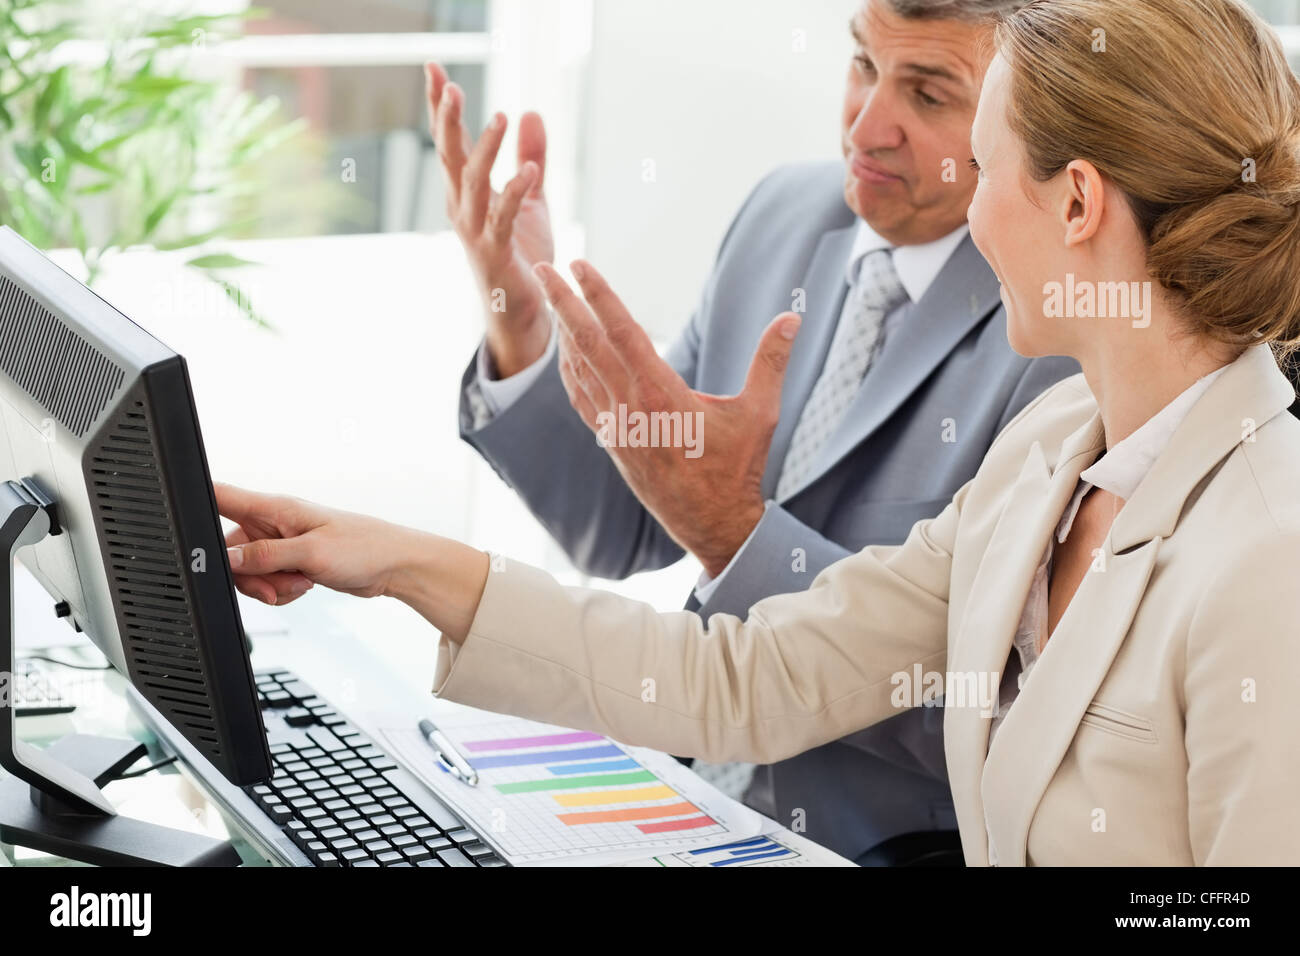 Businessman being corrected by a colleague Stock Photo